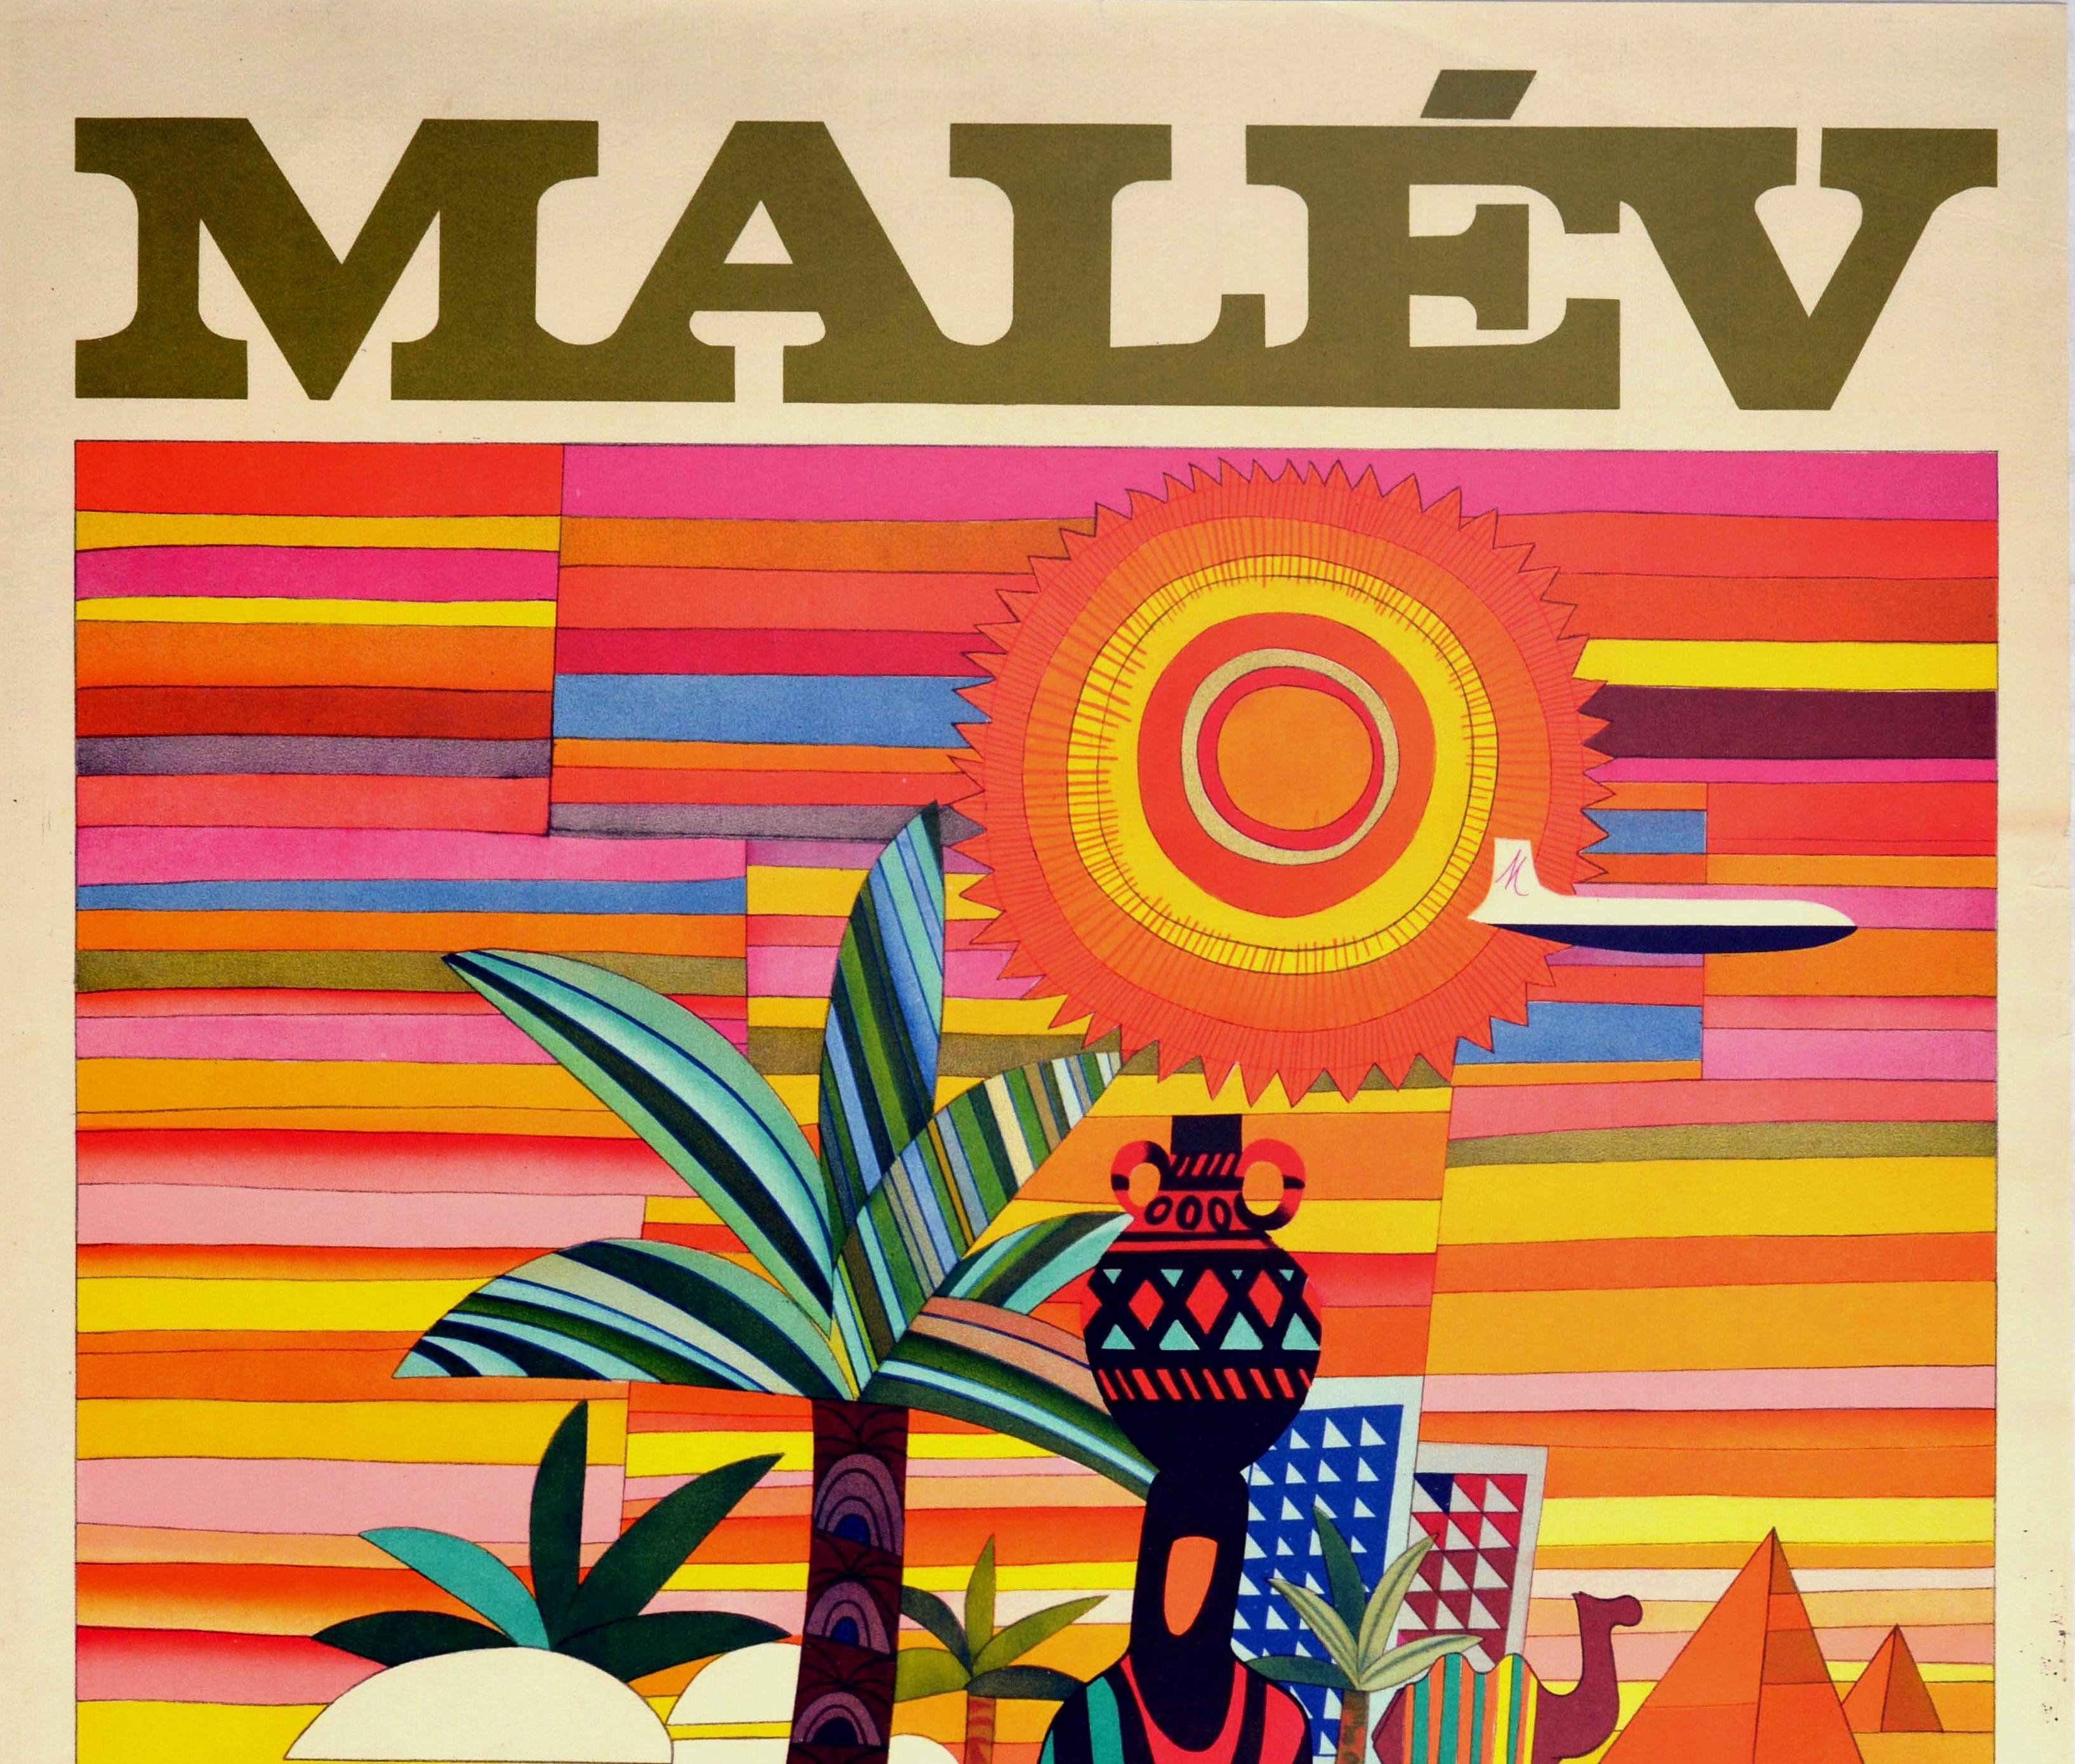 Original Vintage Poster Fly Malev Hungarian Airlines To Middle East Via Budapest - Print by Mate Andras